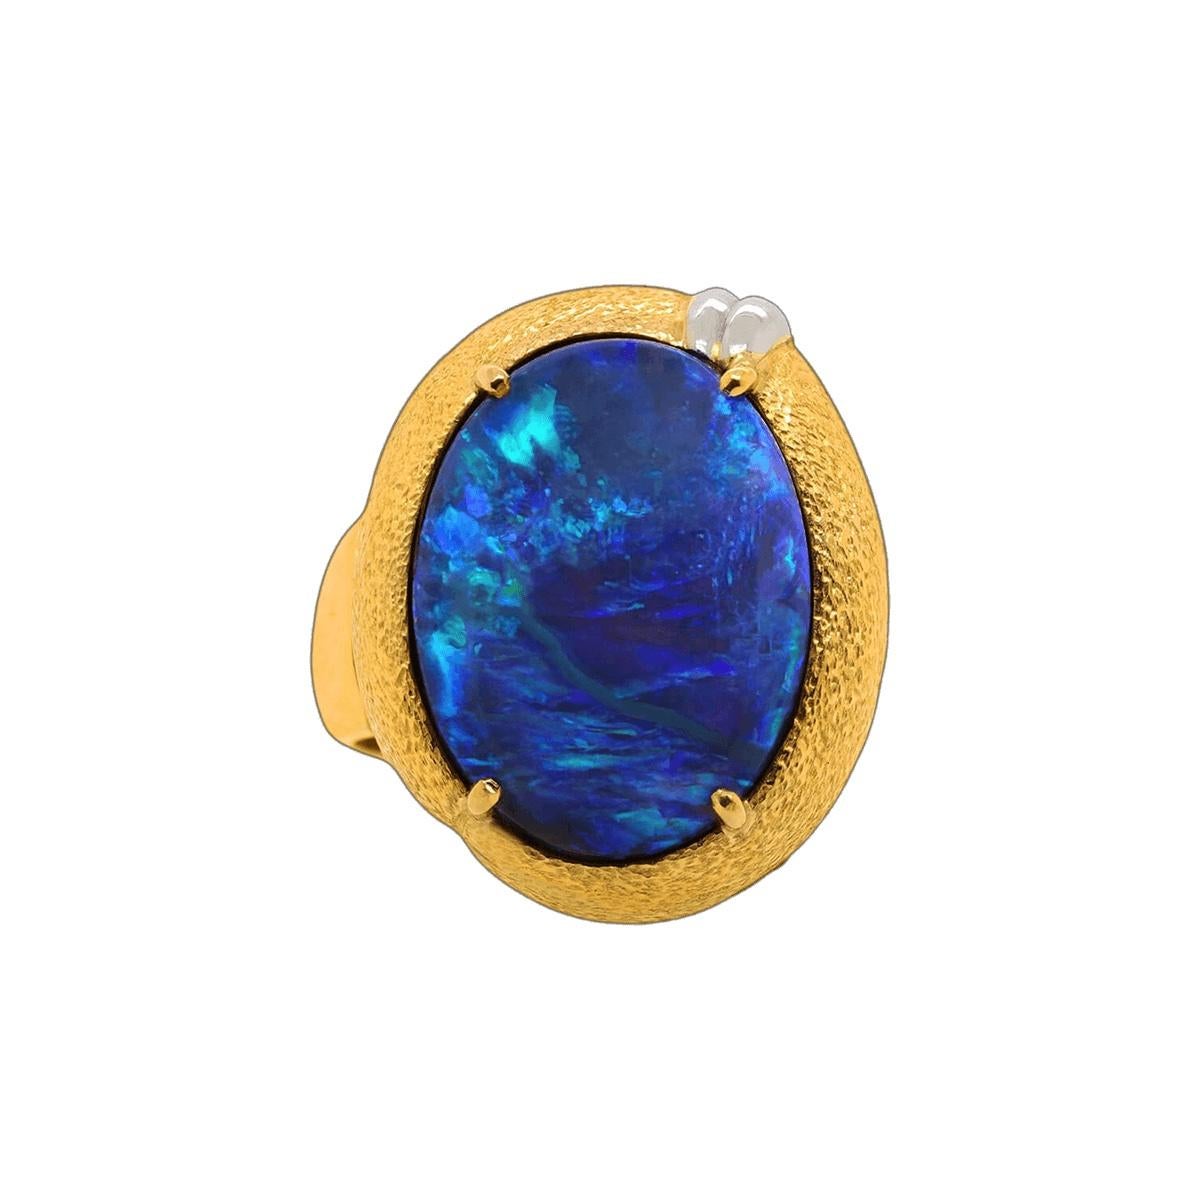 This magnificent black opal from Lightning Ridge is cut from a 